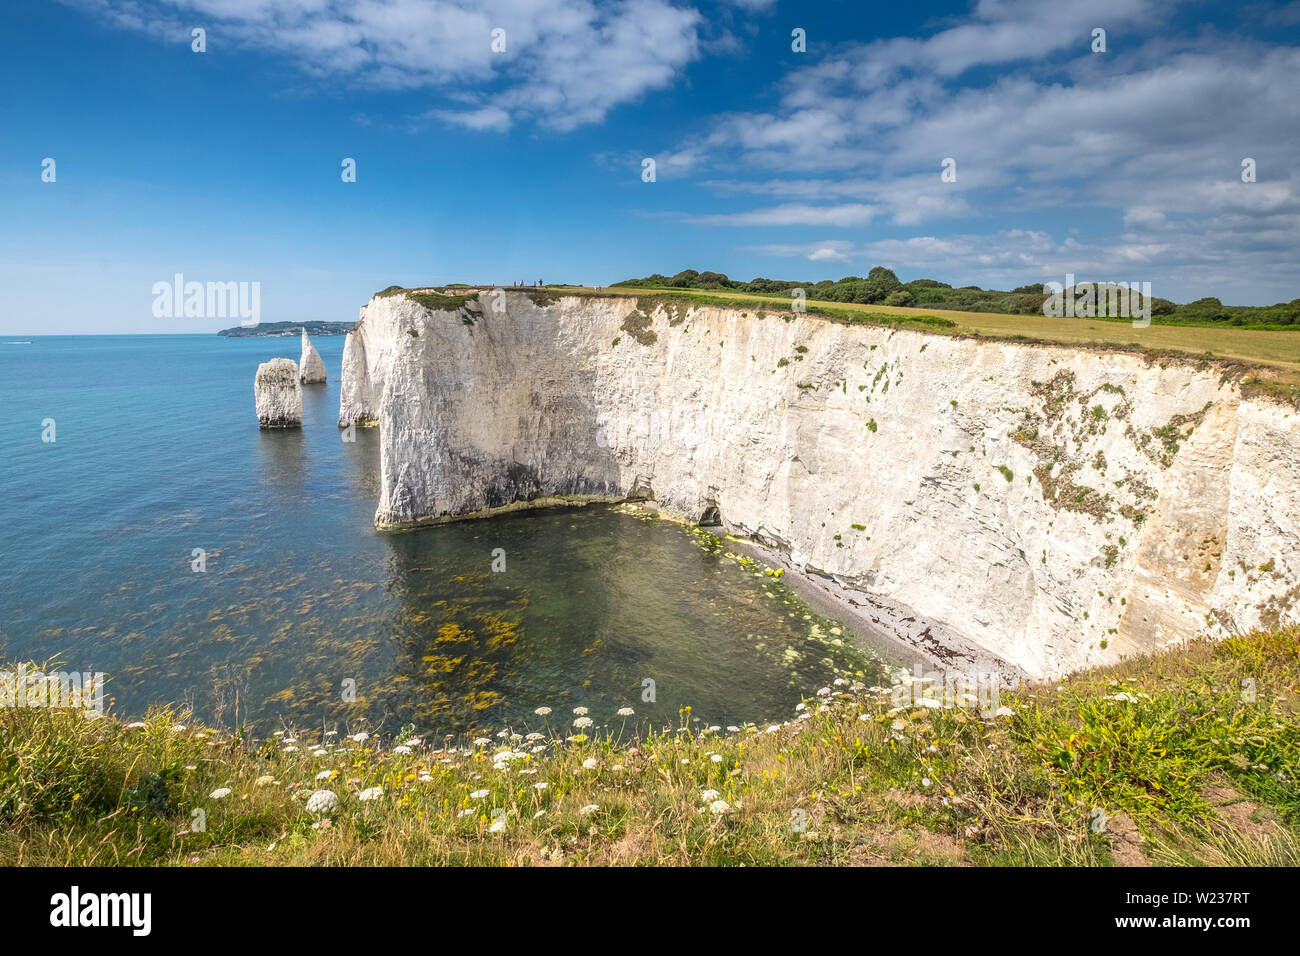 The Pinnacles pictured from Ballard Down, Isle of Purbeck, Dorset, UK Stock Photo